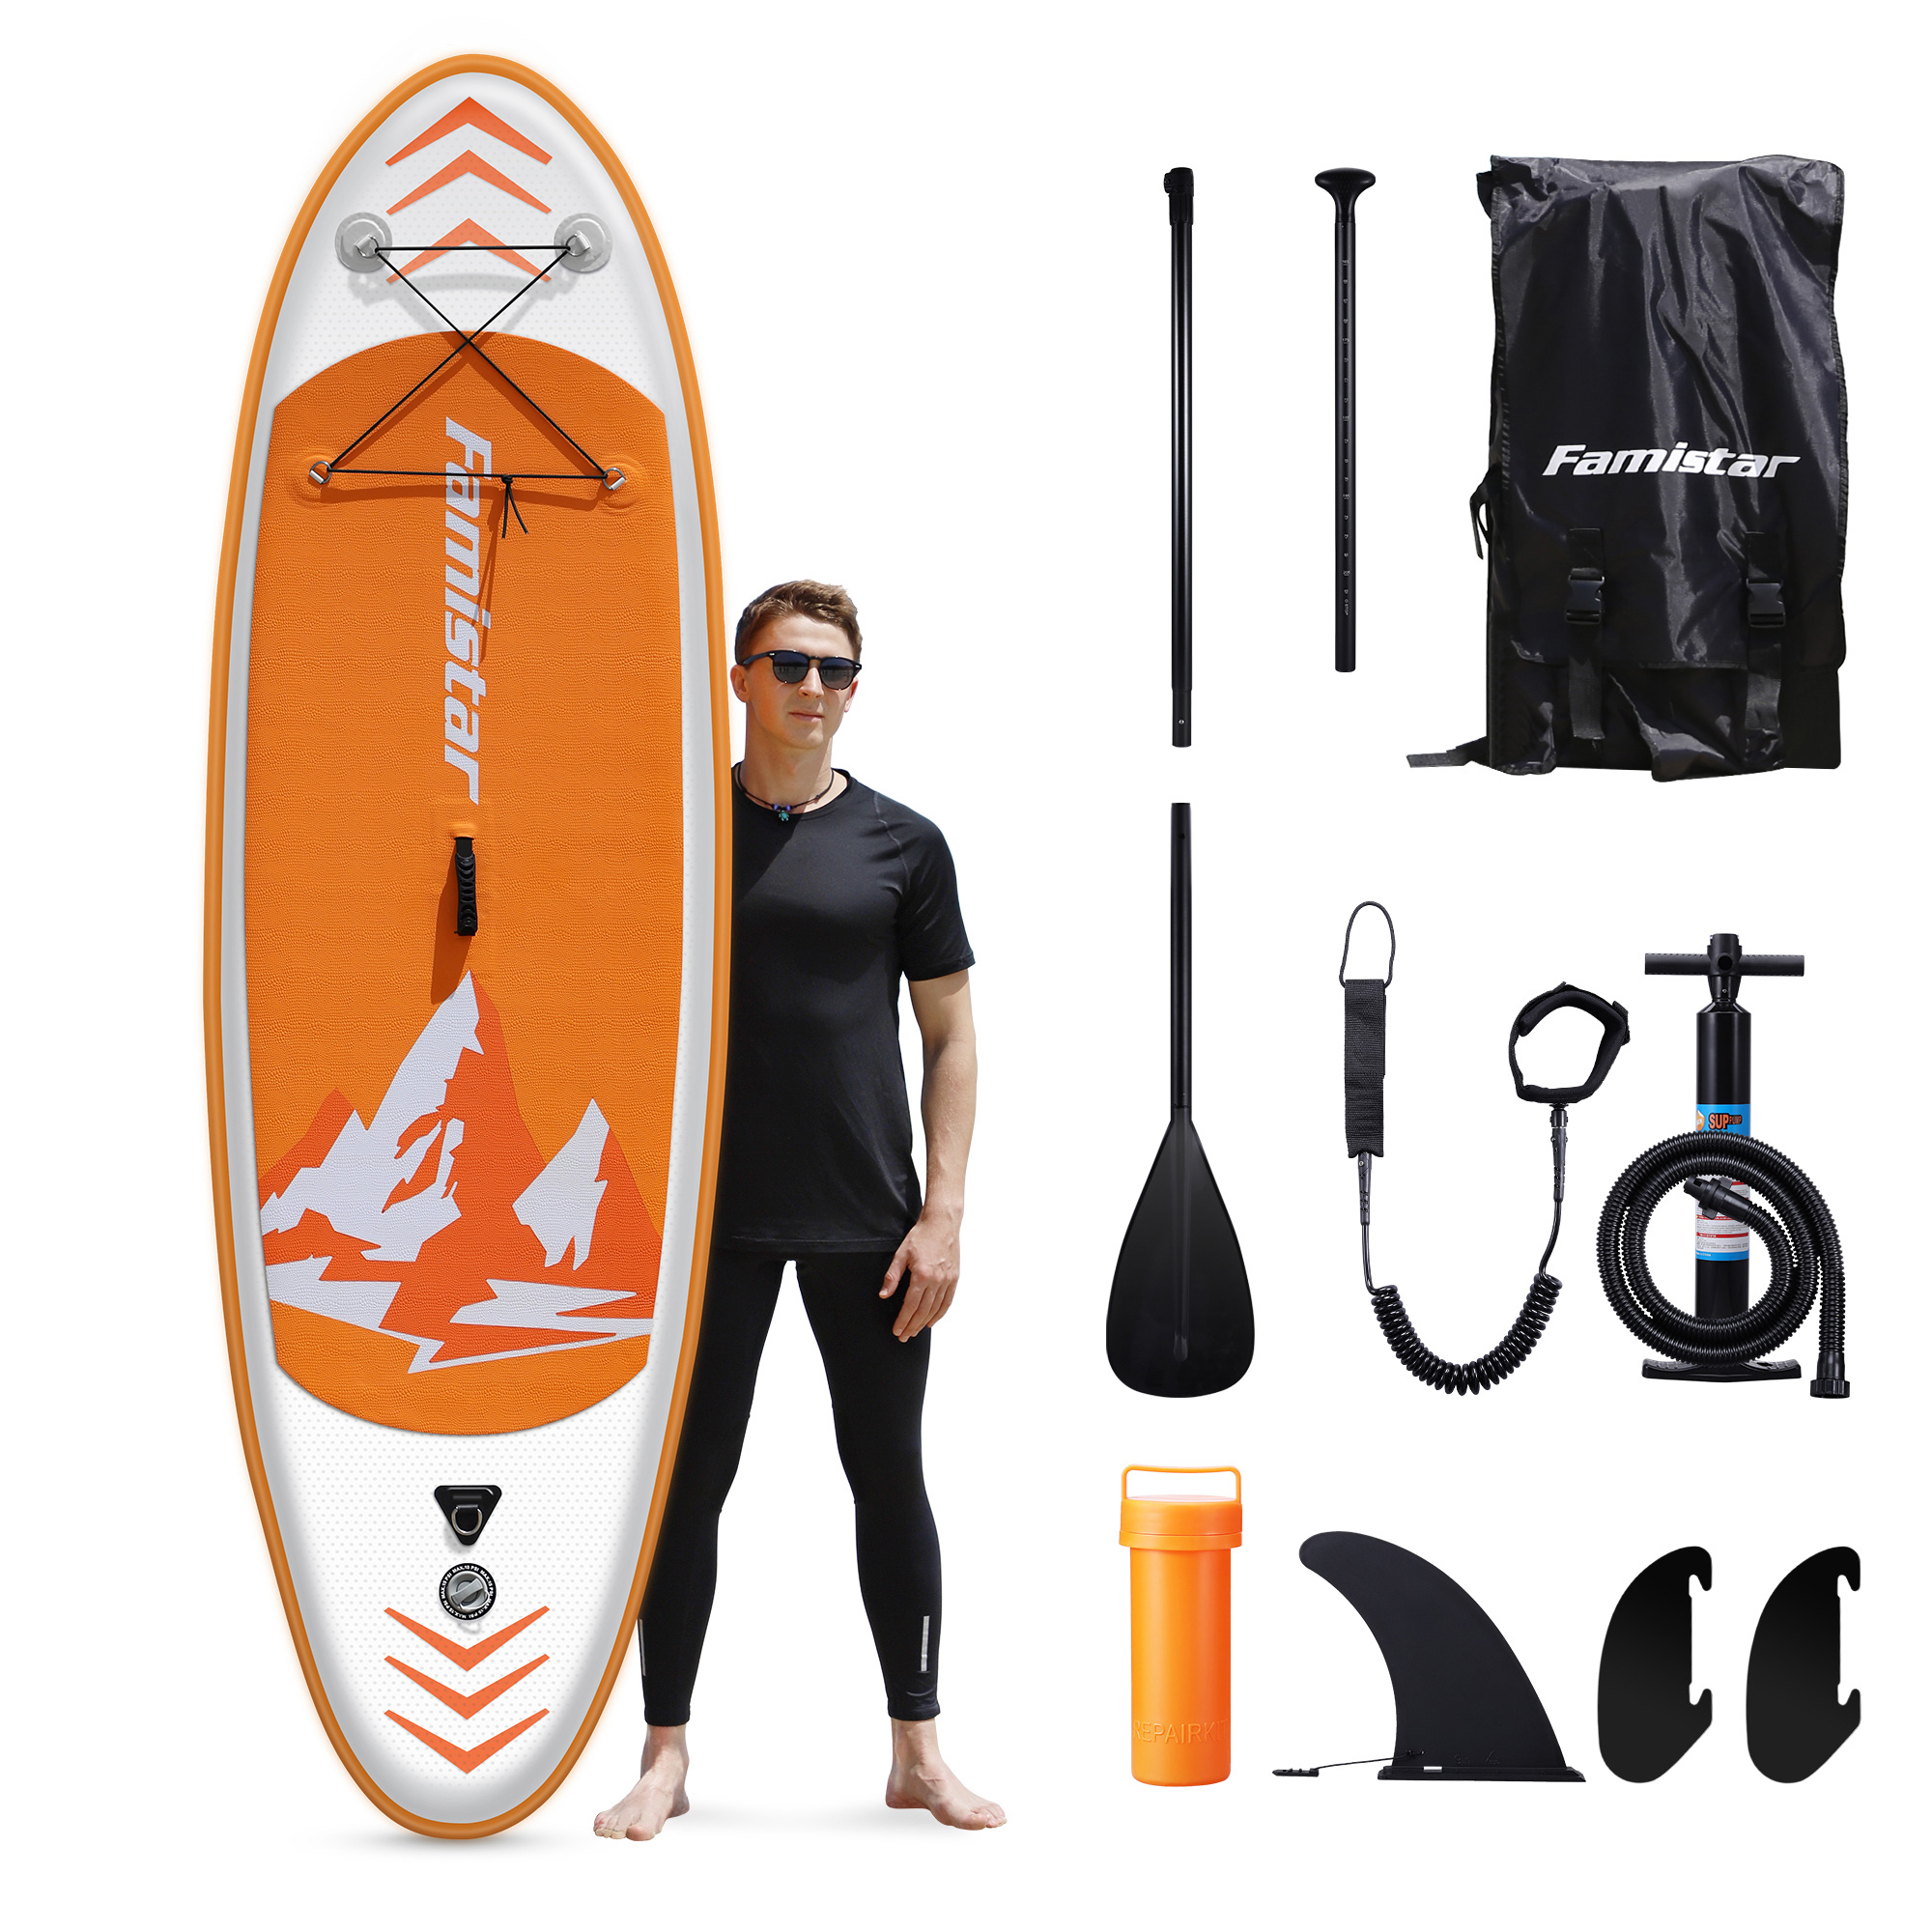 Famistar 8'7" Inflatable Stand Up Paddle Board SUP w/ 3 Fins, Adjustable Paddle, Pump & Carrying Backpack - image 1 of 13